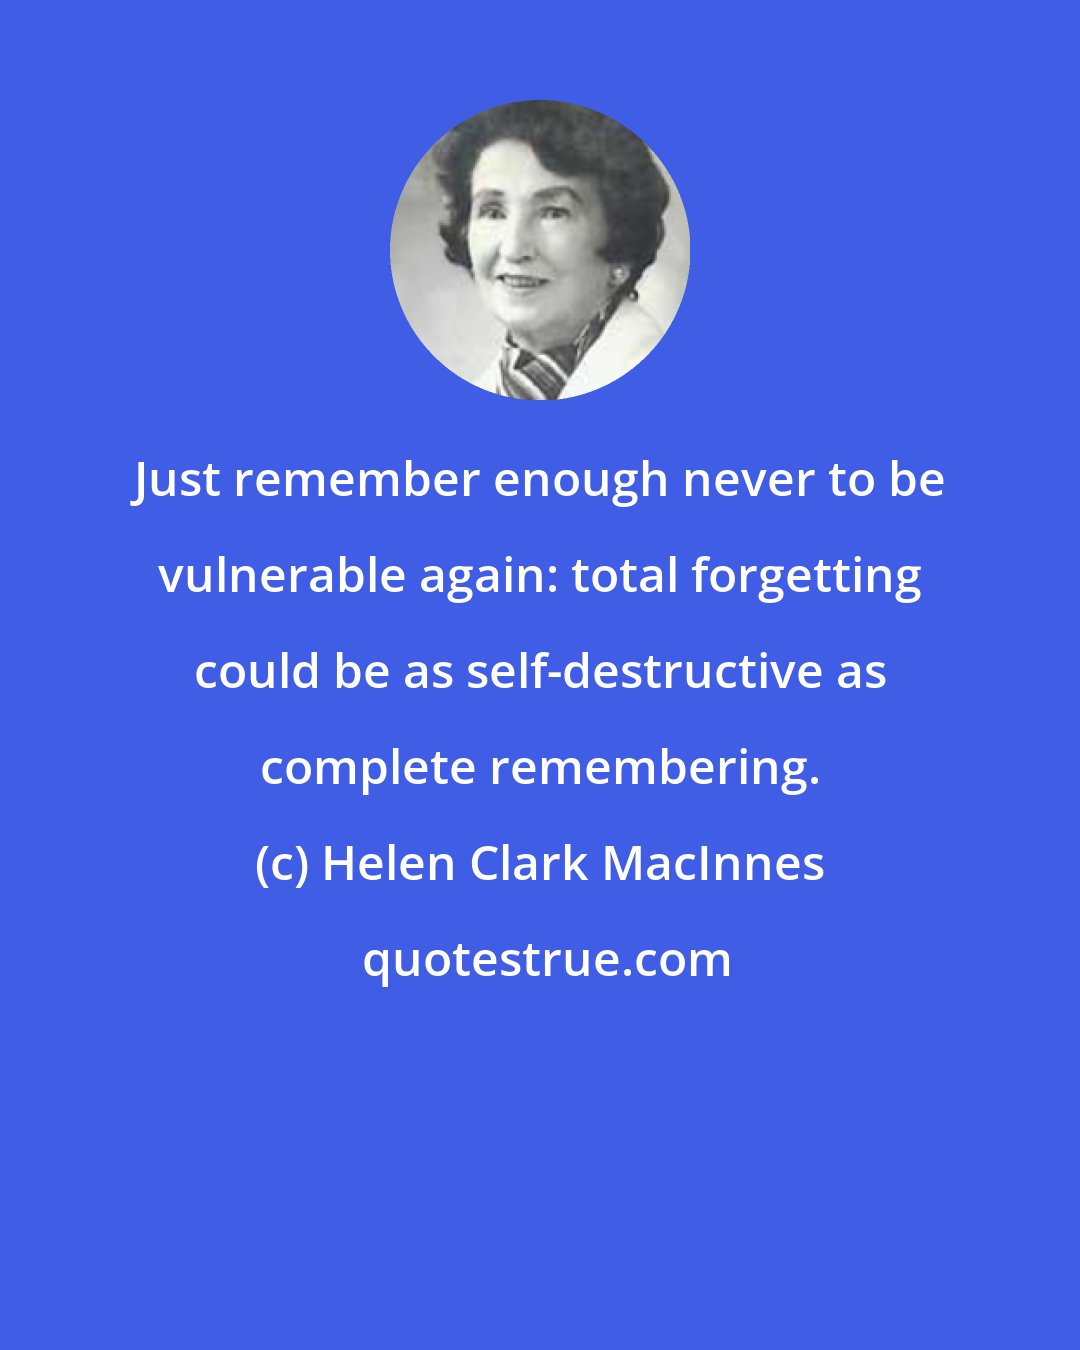 Helen Clark MacInnes: Just remember enough never to be vulnerable again: total forgetting could be as self-destructive as complete remembering.